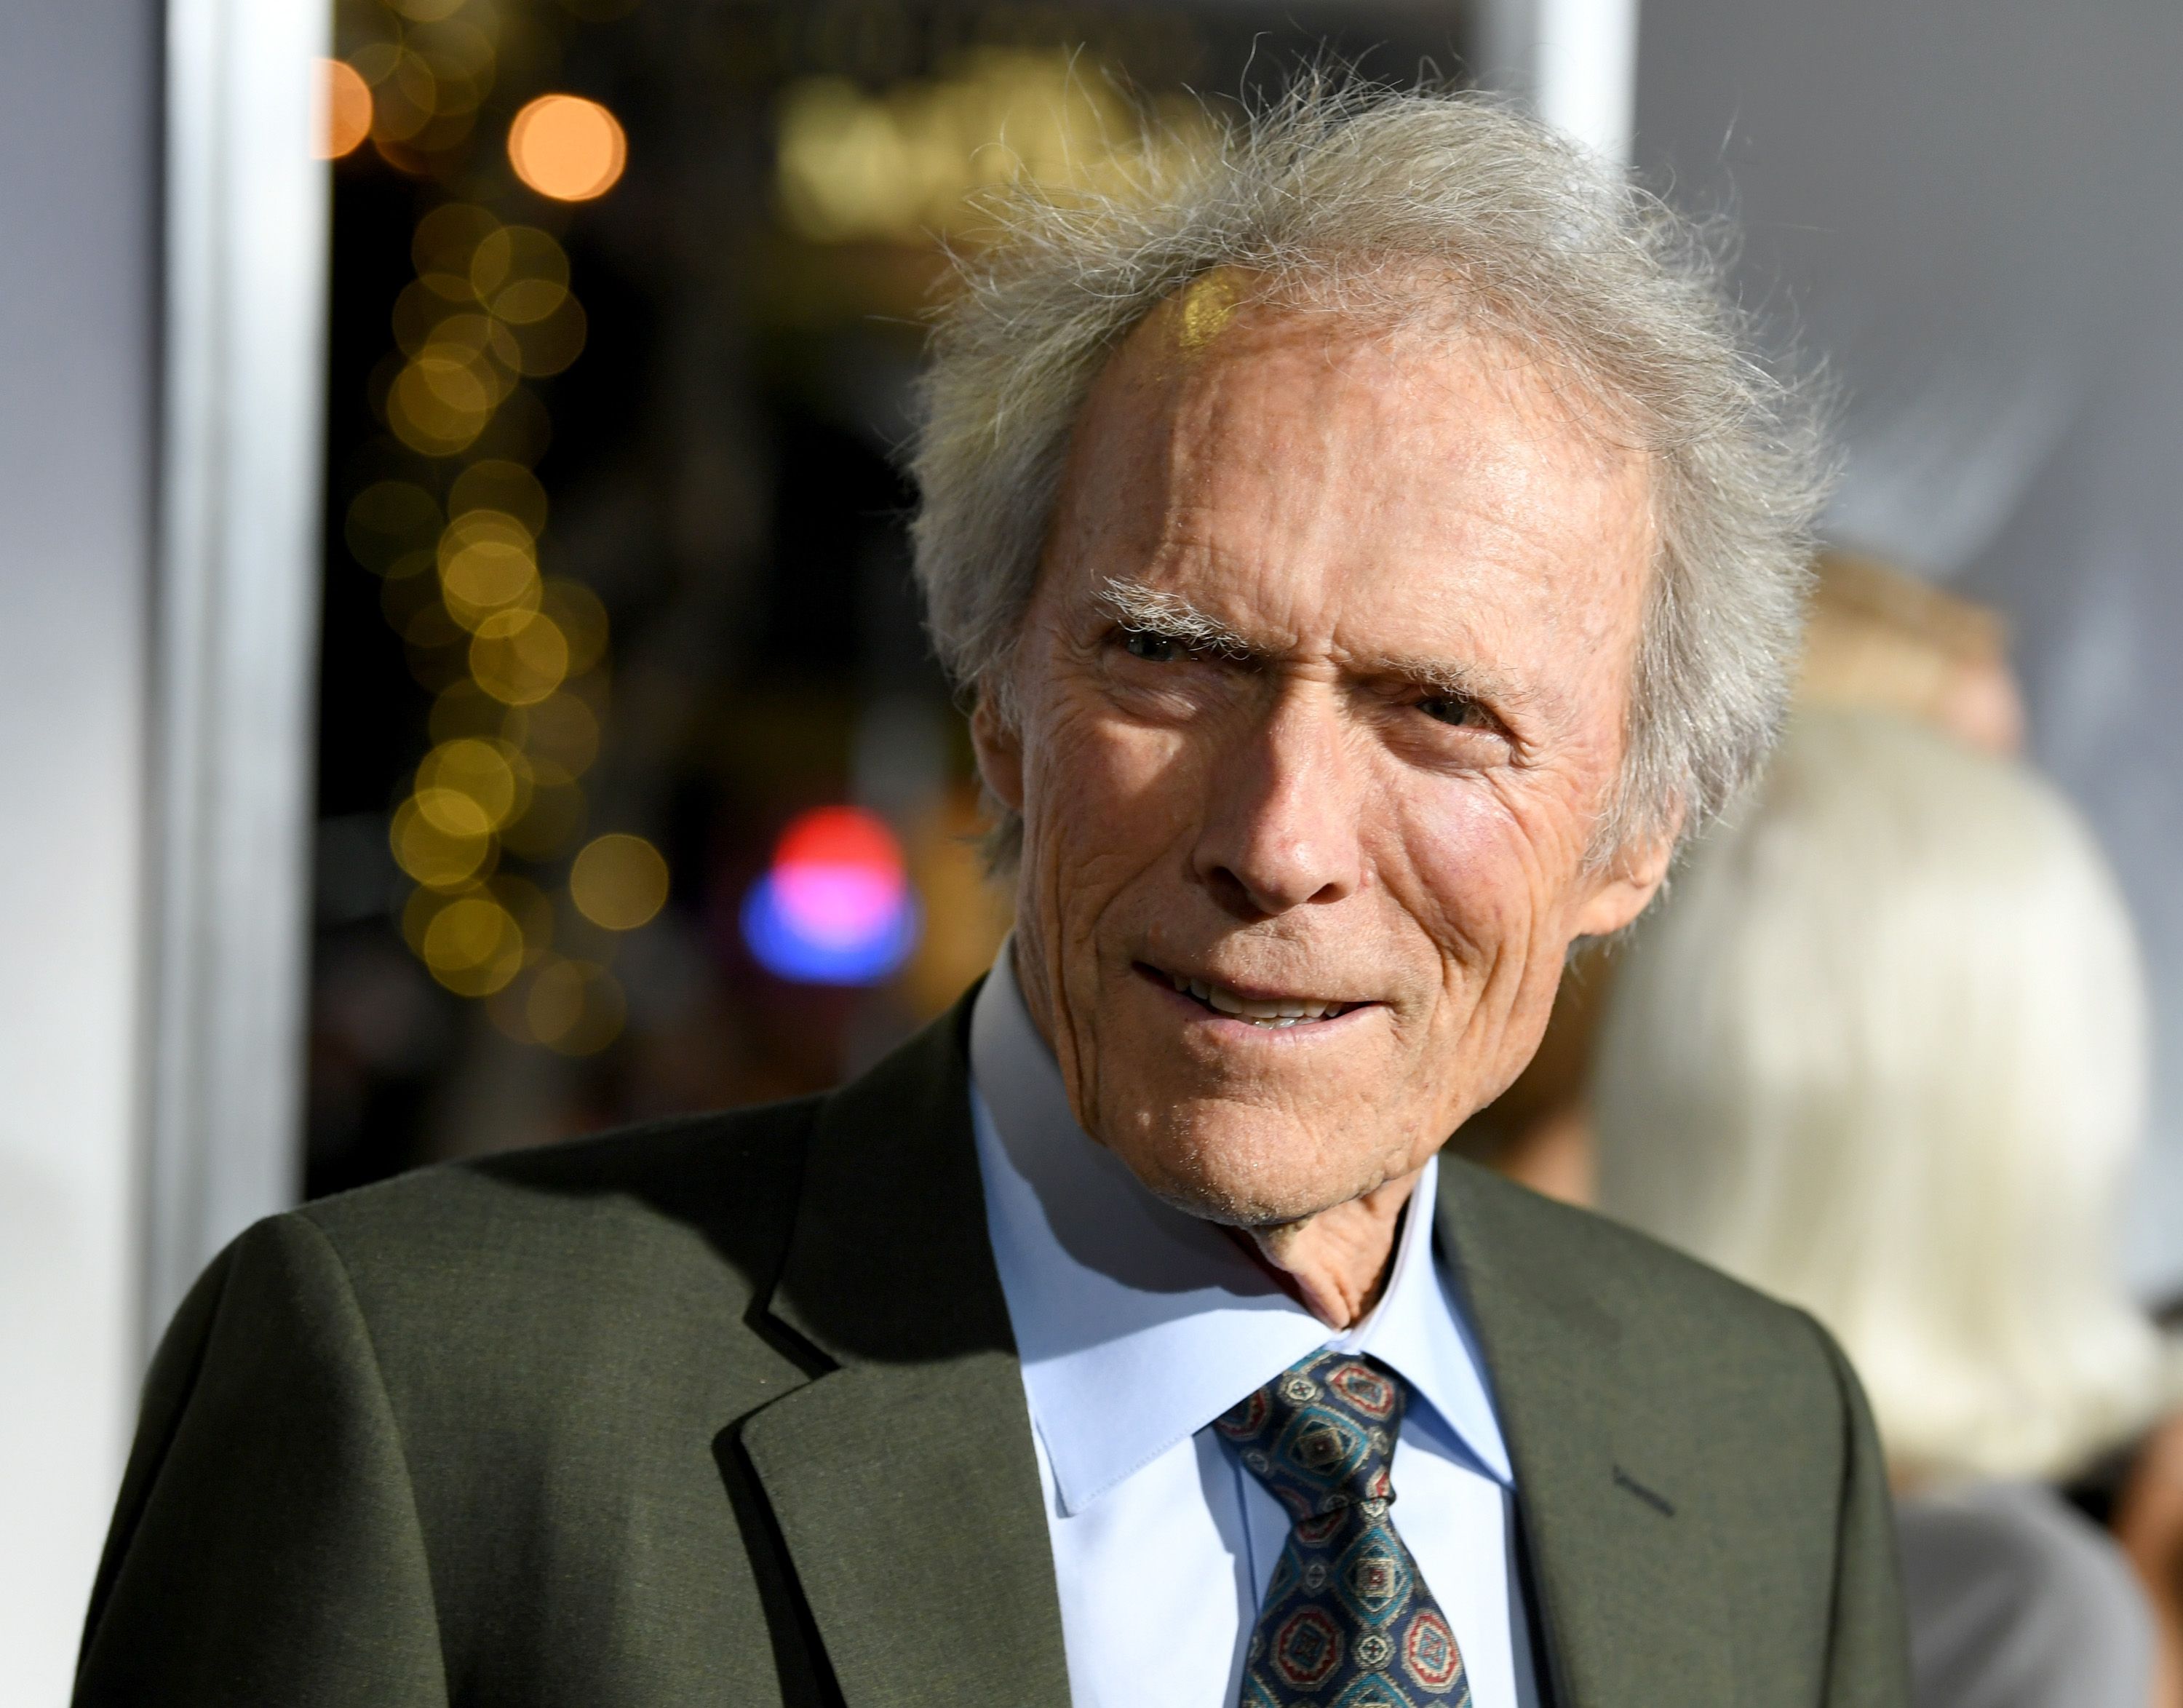 Clint Eastwood arrives at the premiere of Warner Bros. Pictures' "The Mule" at the Village Theatre on December 10, 2018 in Los Angeles, California | Photo: Getty Images